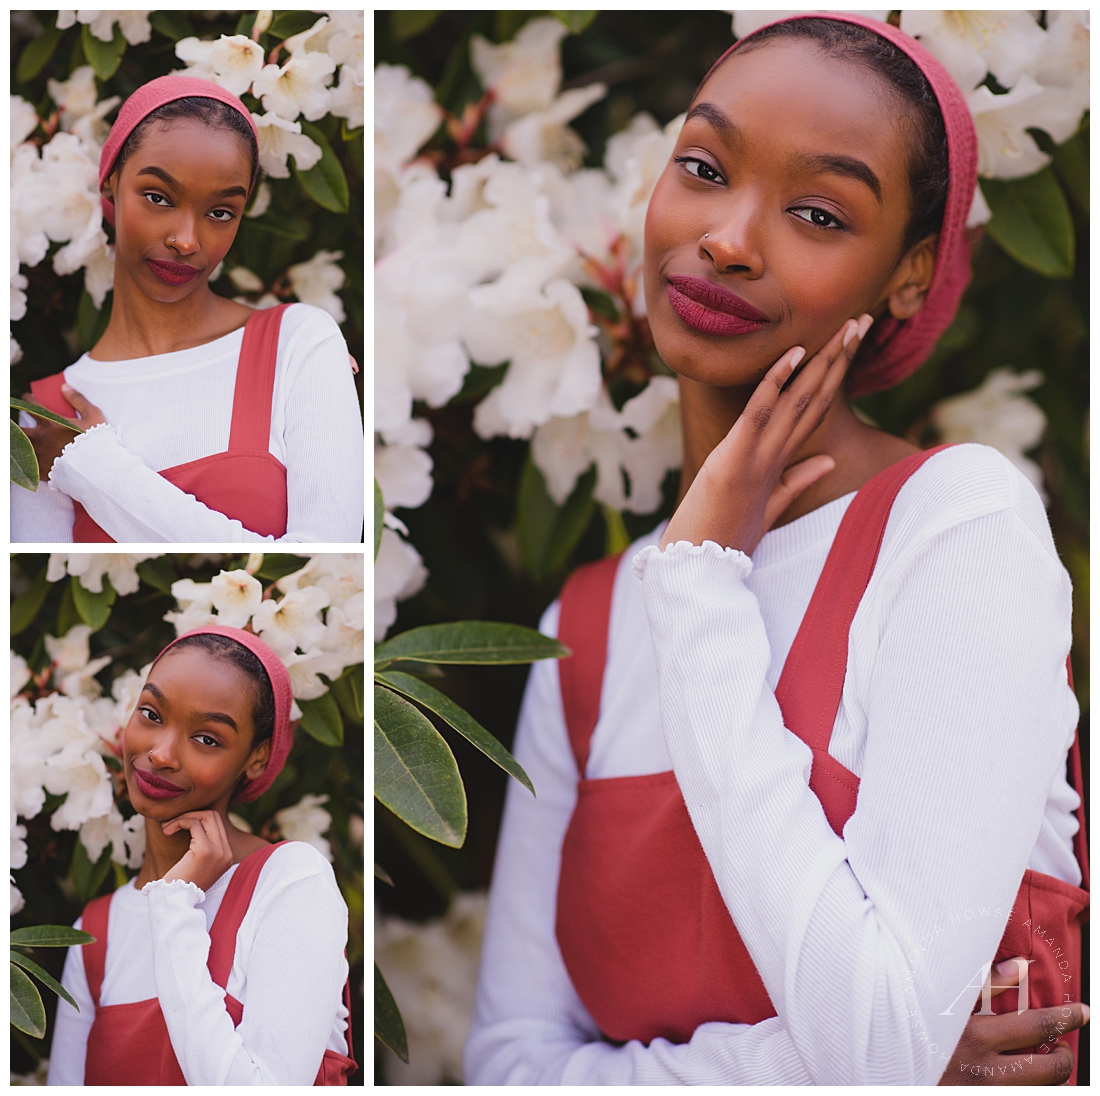 Senior Portraits in a Park with White Flowers | Photographed by Tacoma Senior Photographer Amanda Howse